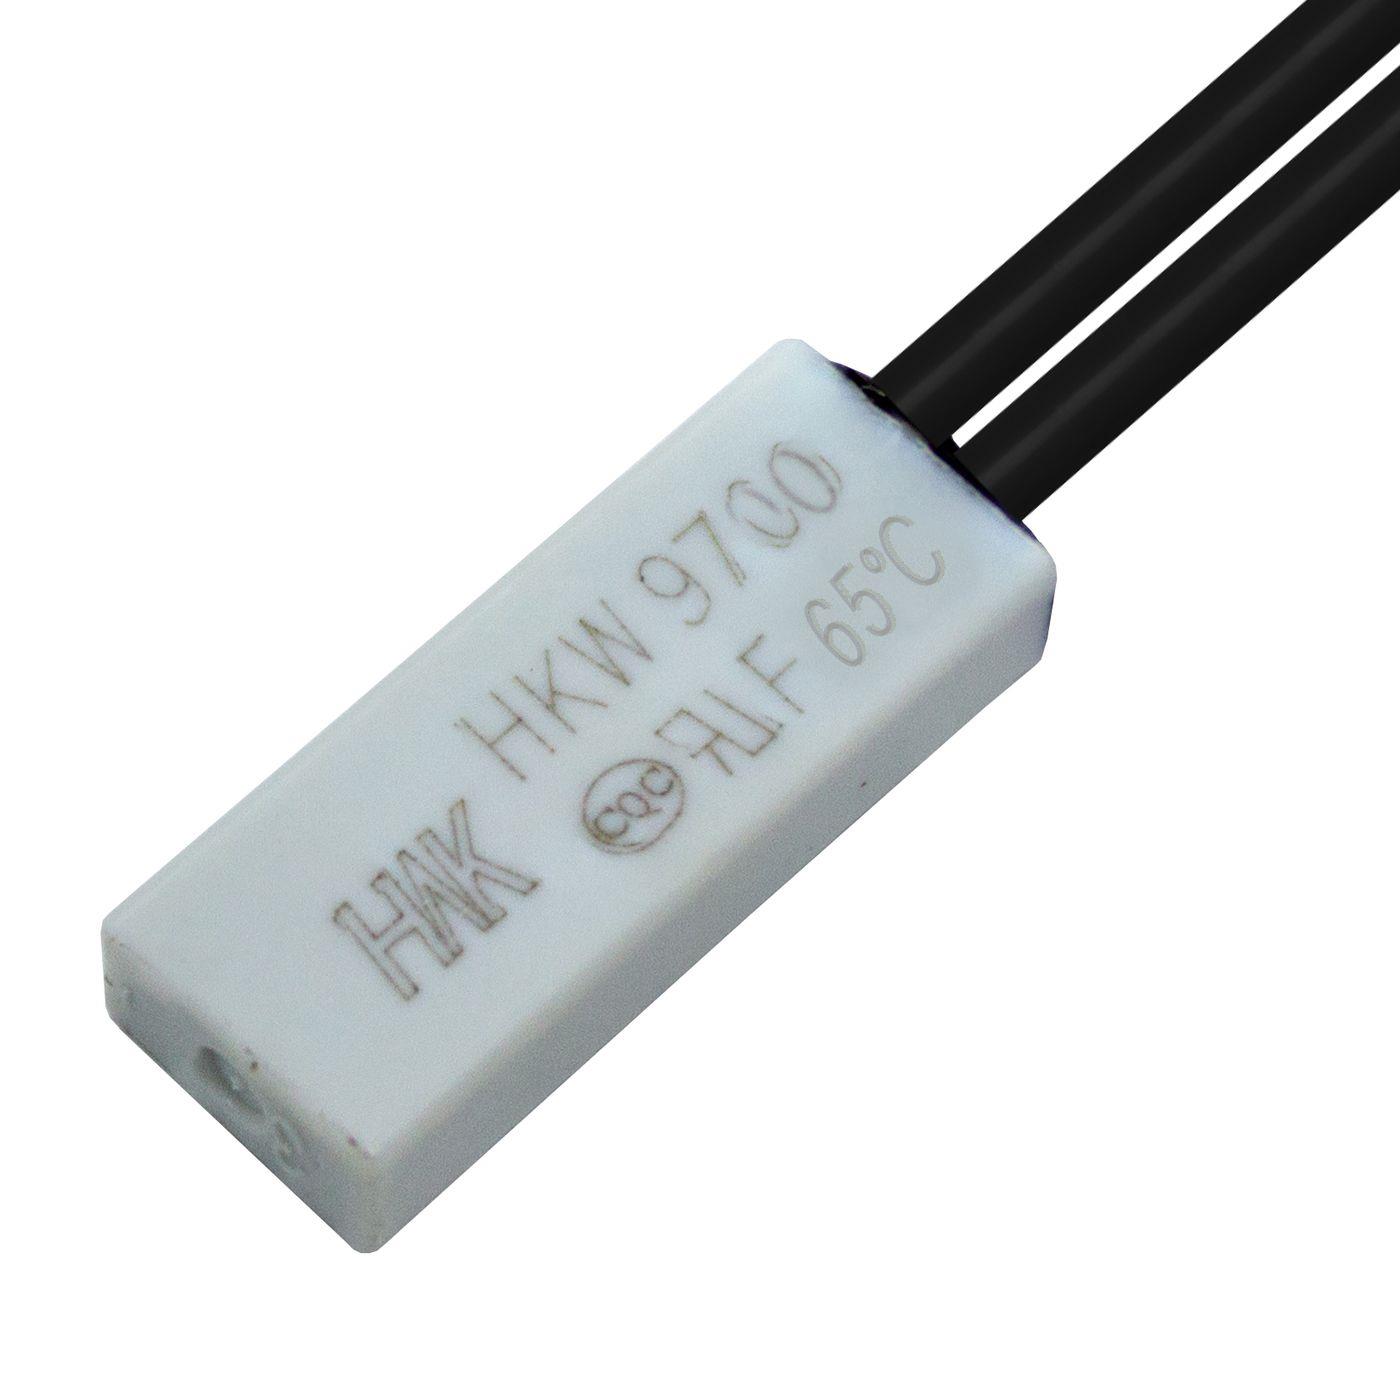 Thermal switch 65°C NO contact 250V 5A Cable Temperature switch thermostat Bimetal Thermal protection